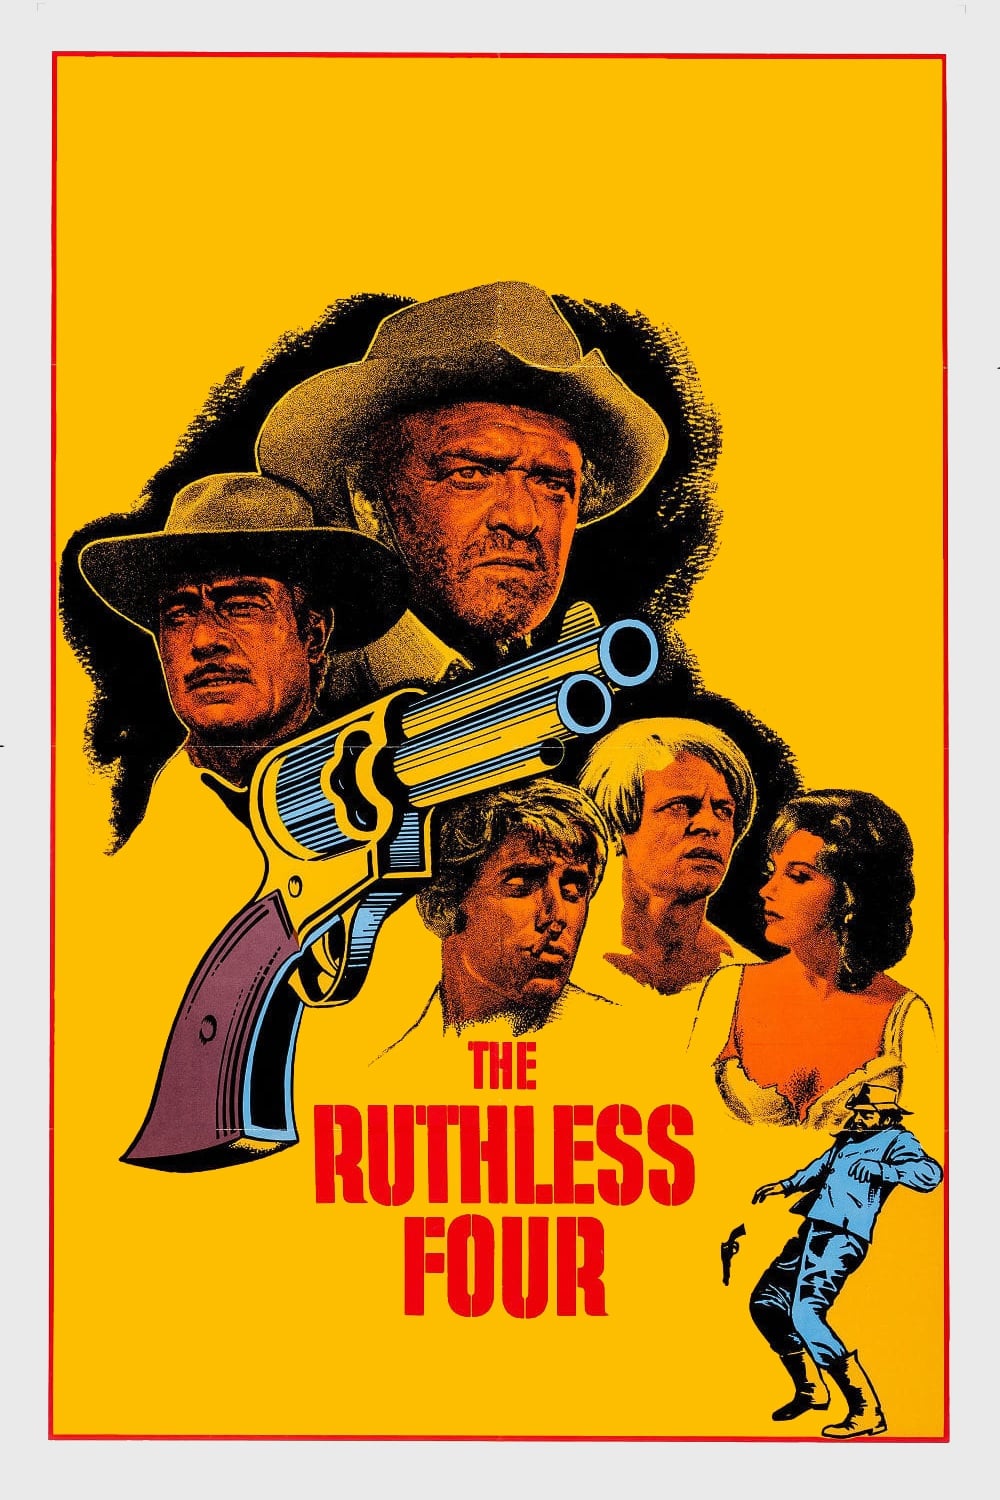 The Ruthless Four (1968)